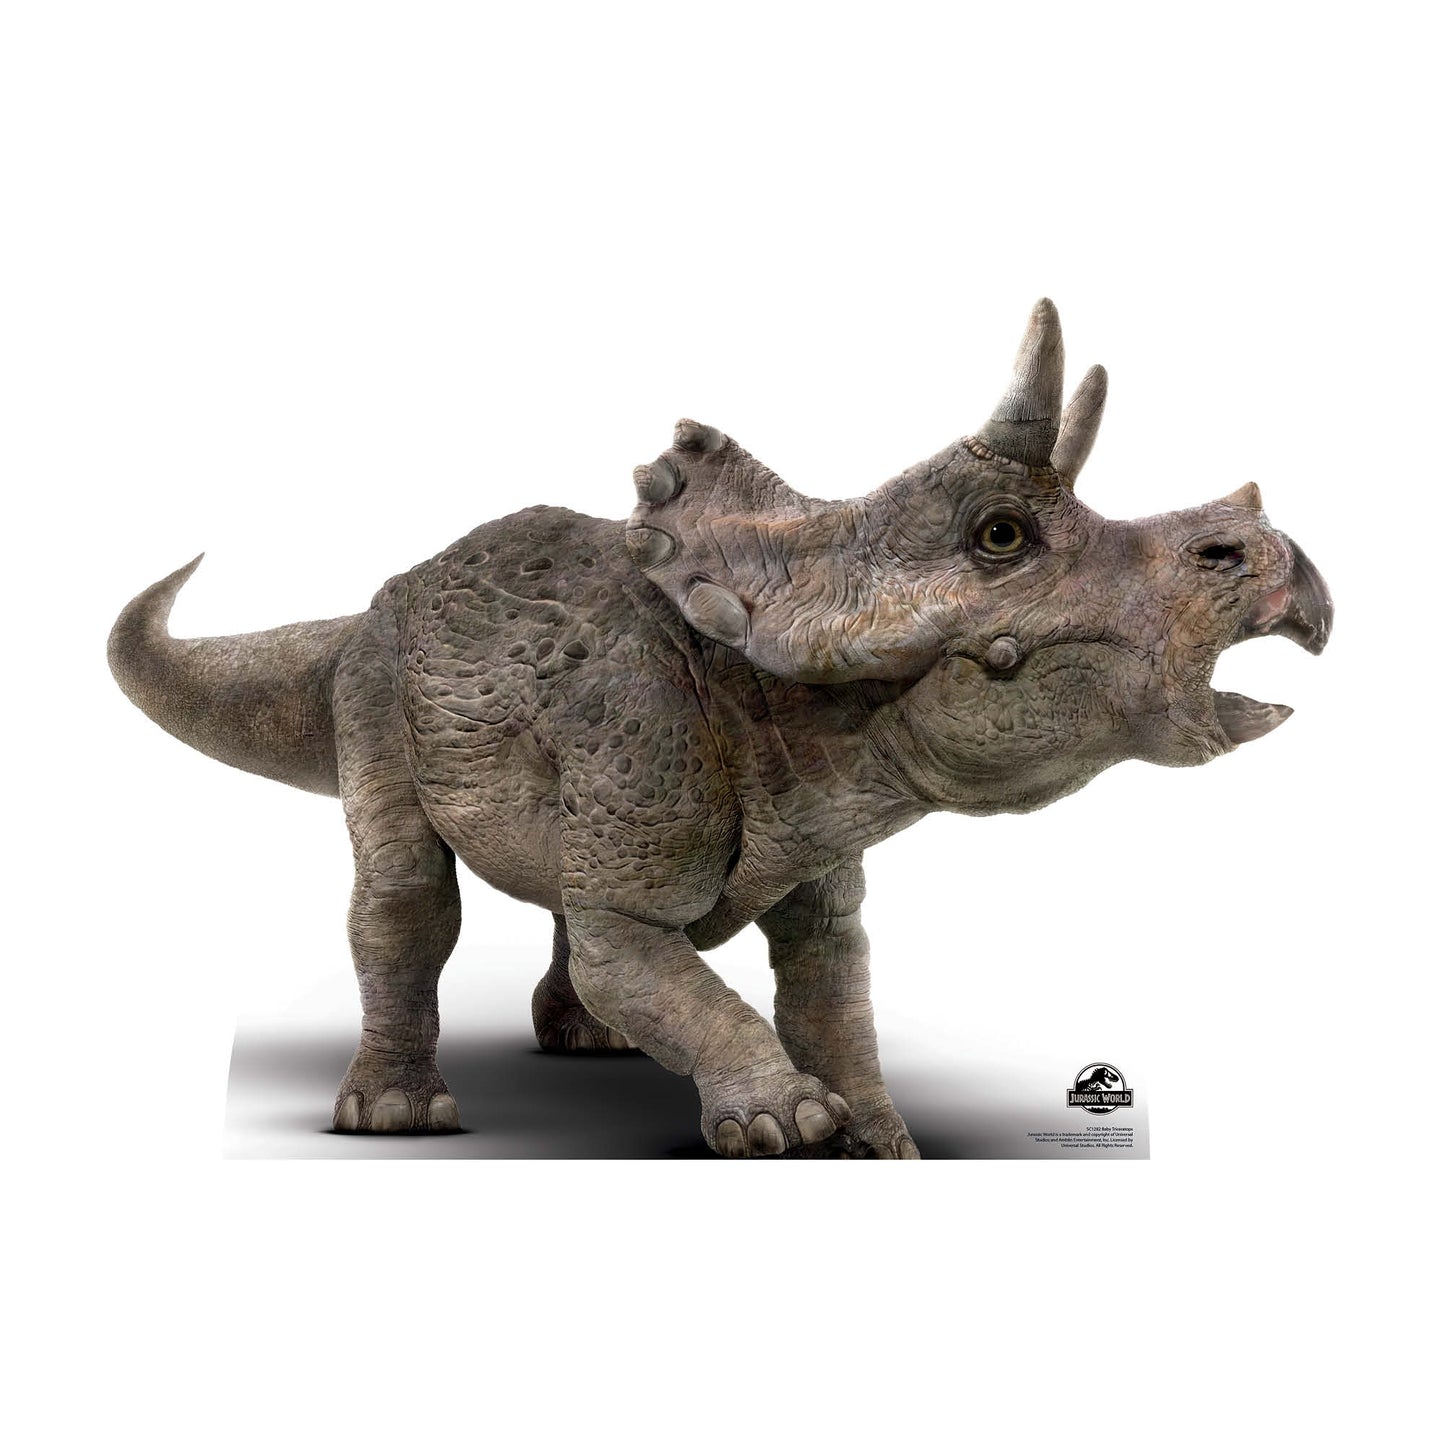 SC1282 Official Jurassic World Baby Triceratops Dinosaur Cardboard Cut Out Height 61cm